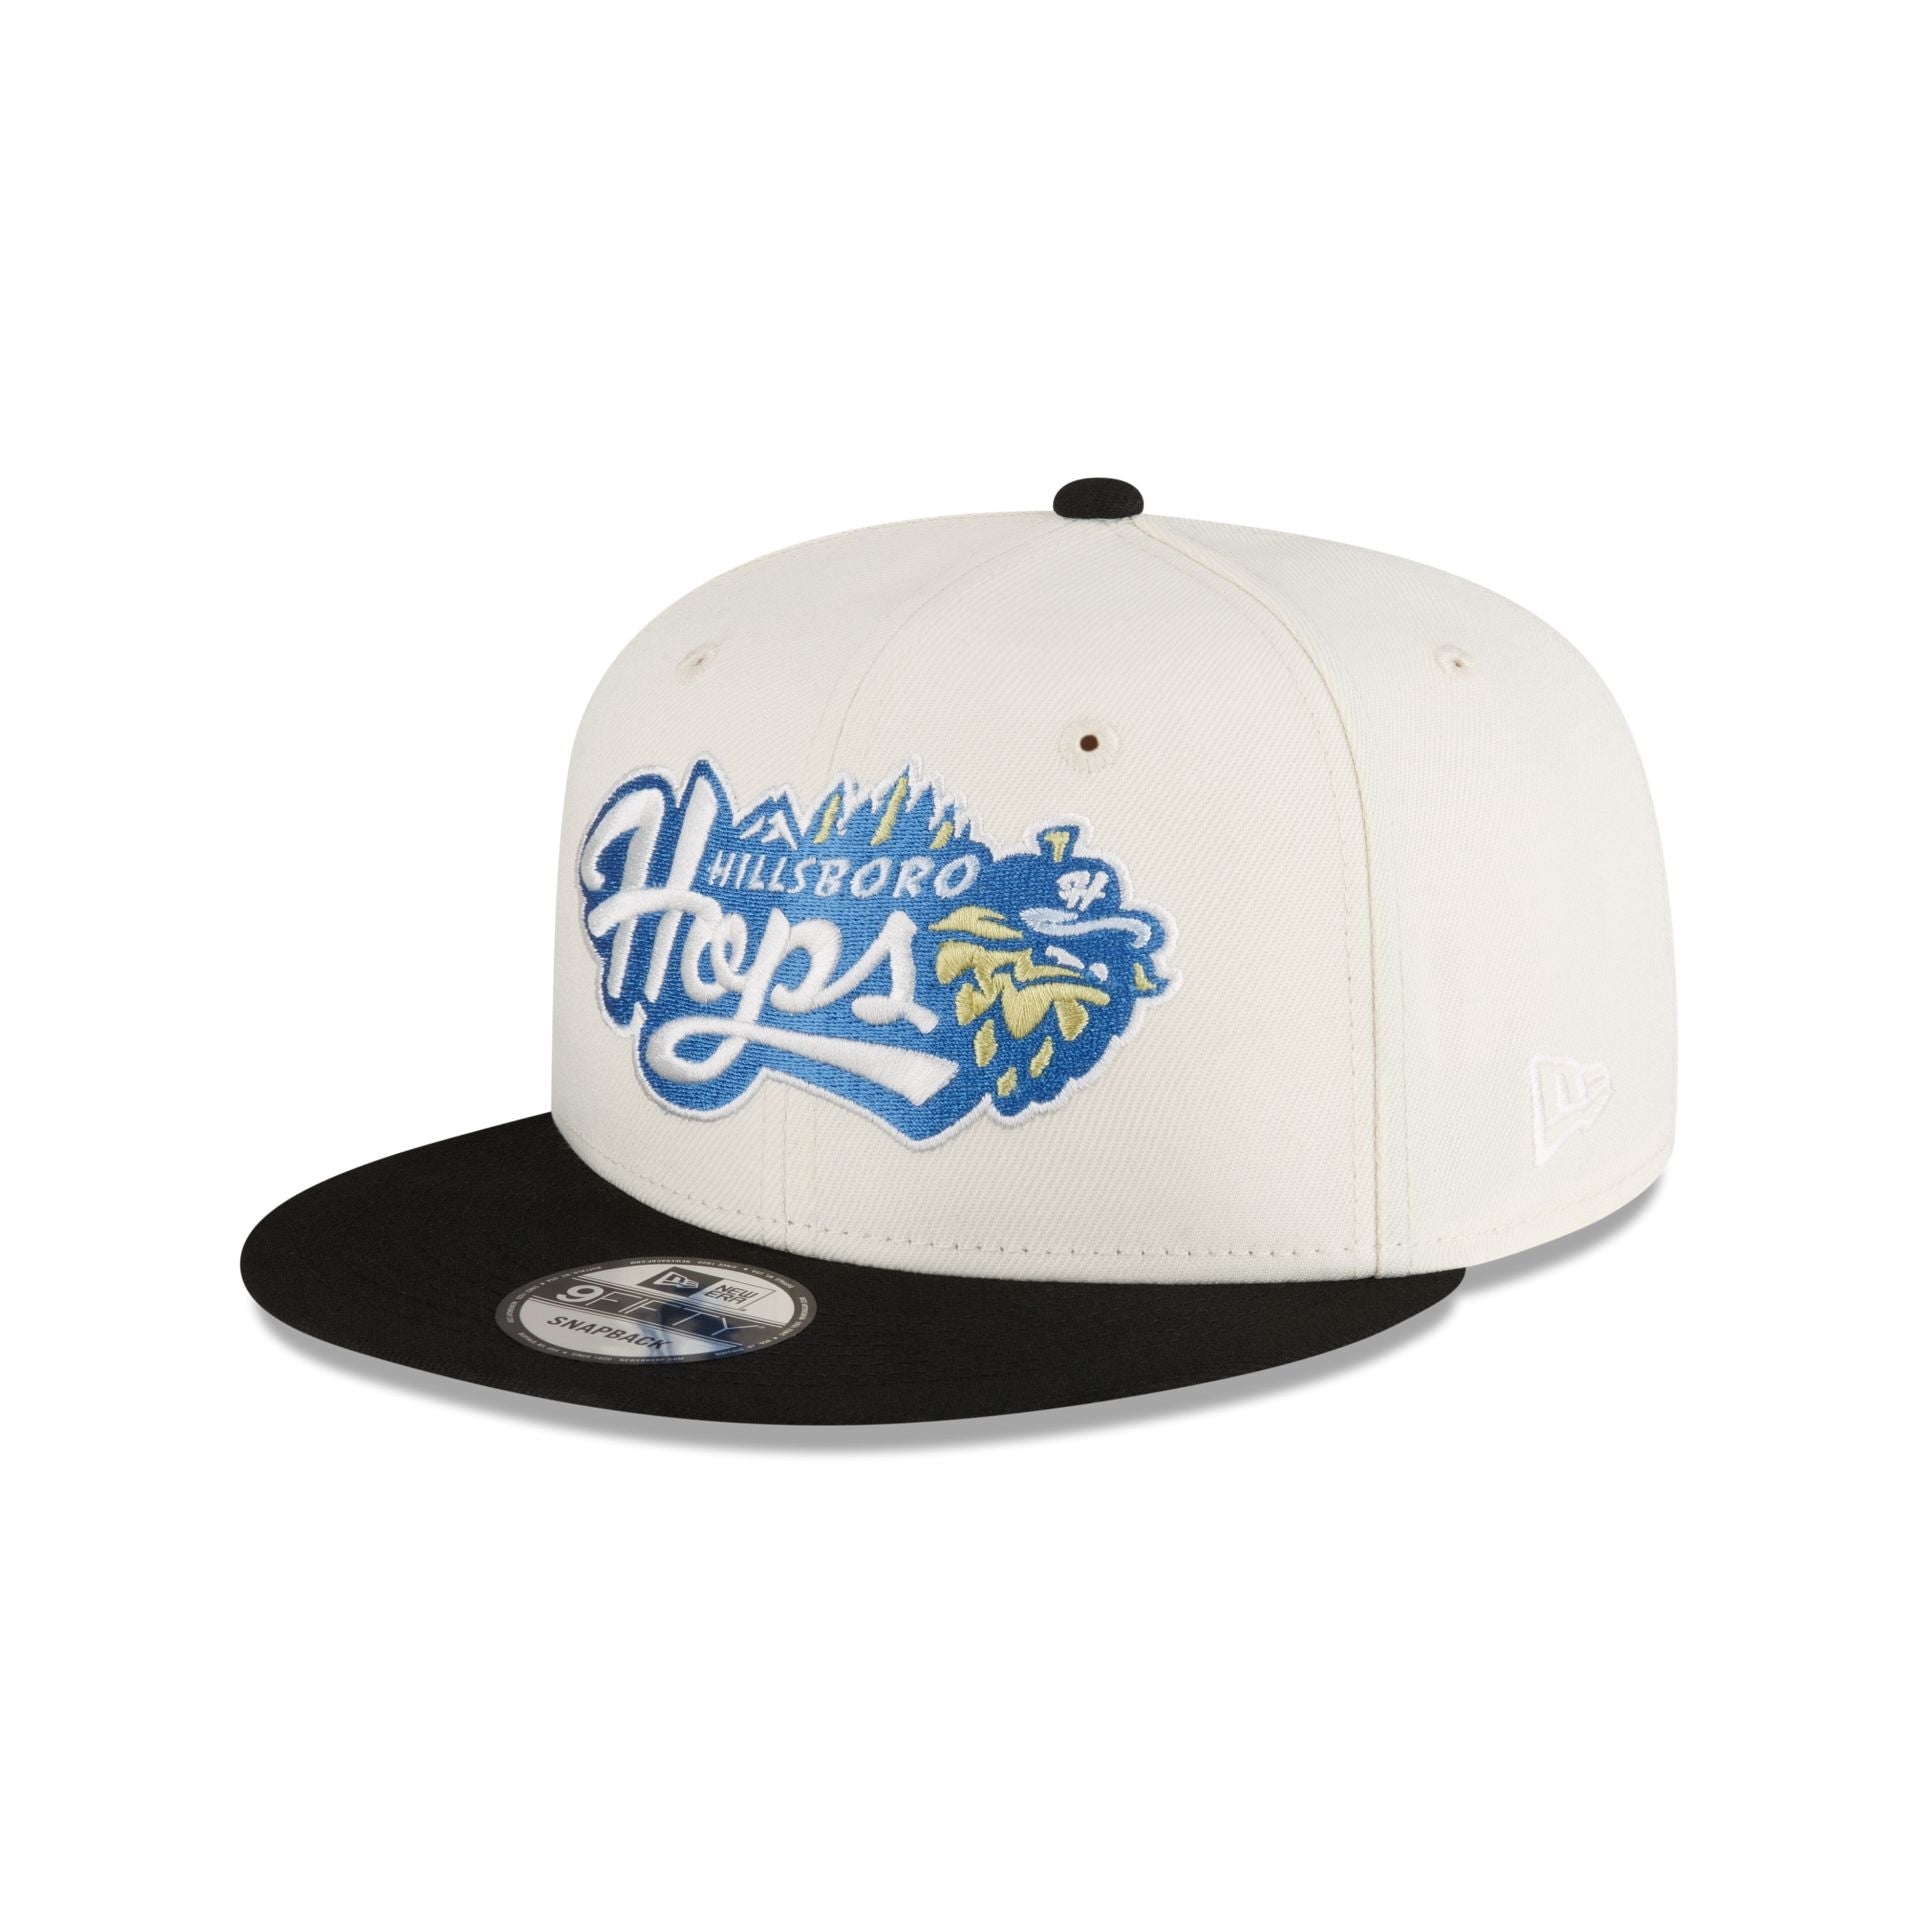 Hilllsboro Hops New Era Authentic 59FIFTY Fitted Hat - Navy/Light Blue